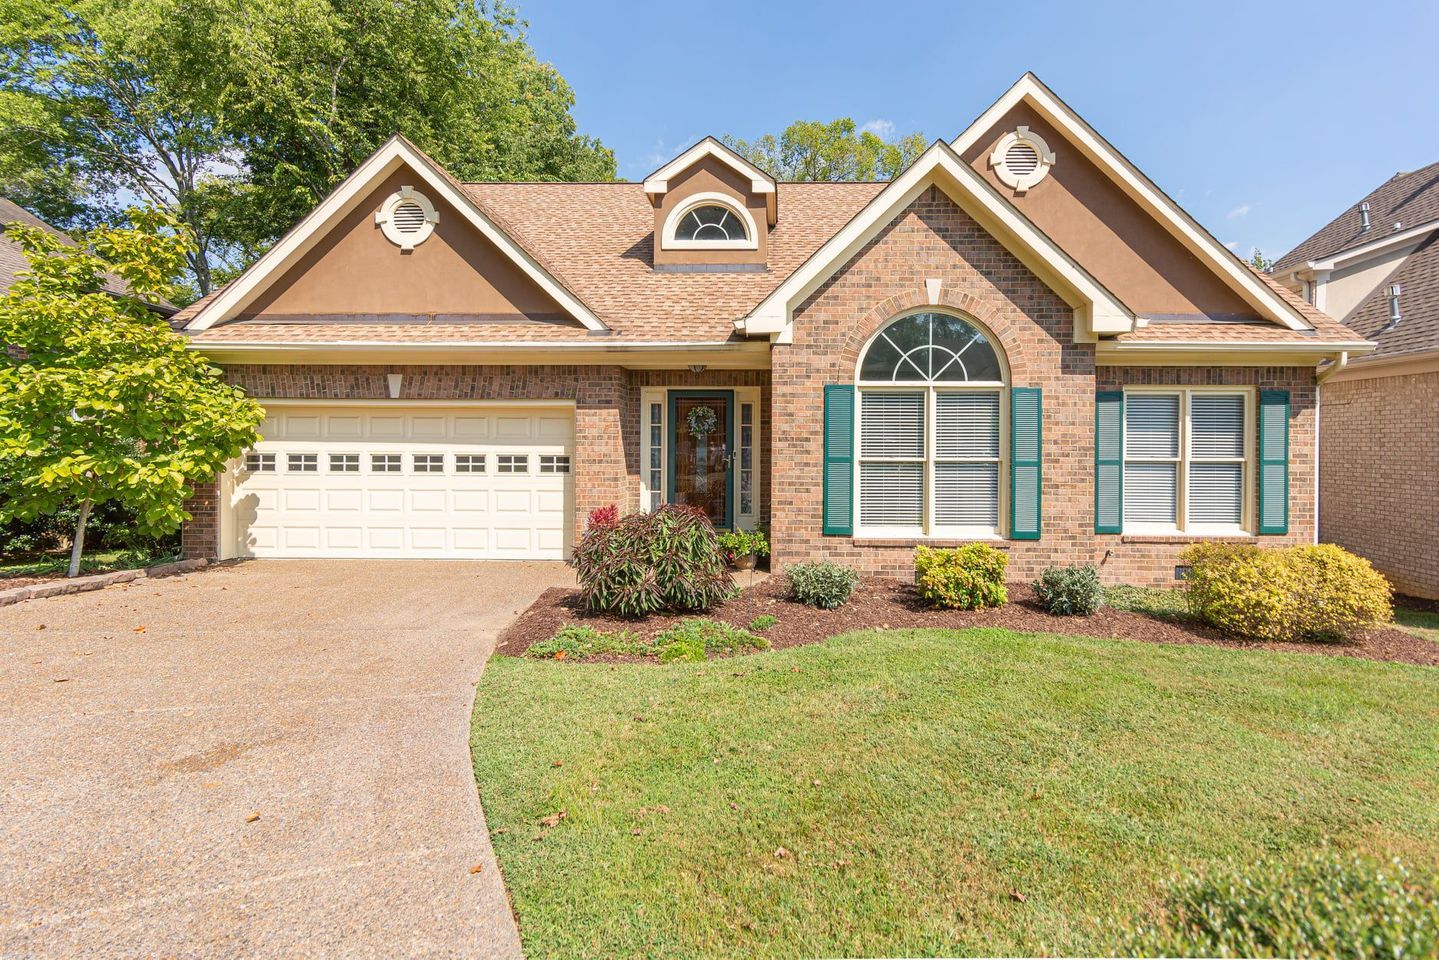 homes in Brentwood and Franklin, Tennessee